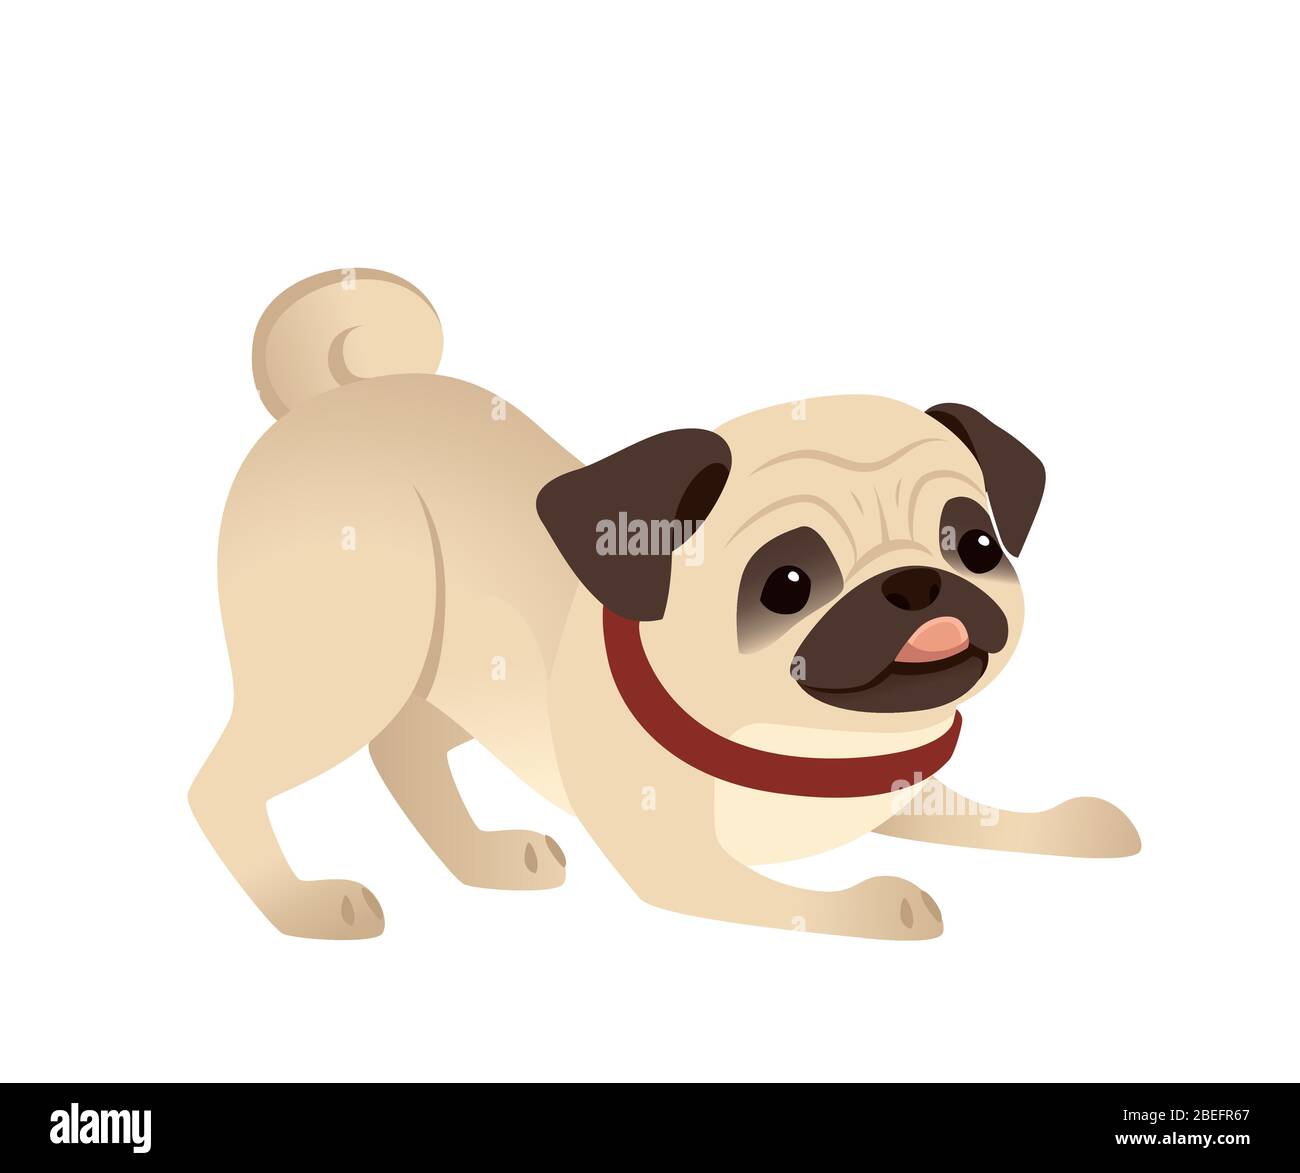 Cute small friendly pug dog cartoon domestic animal design flat vector illustration isolated on white background Stock Vector